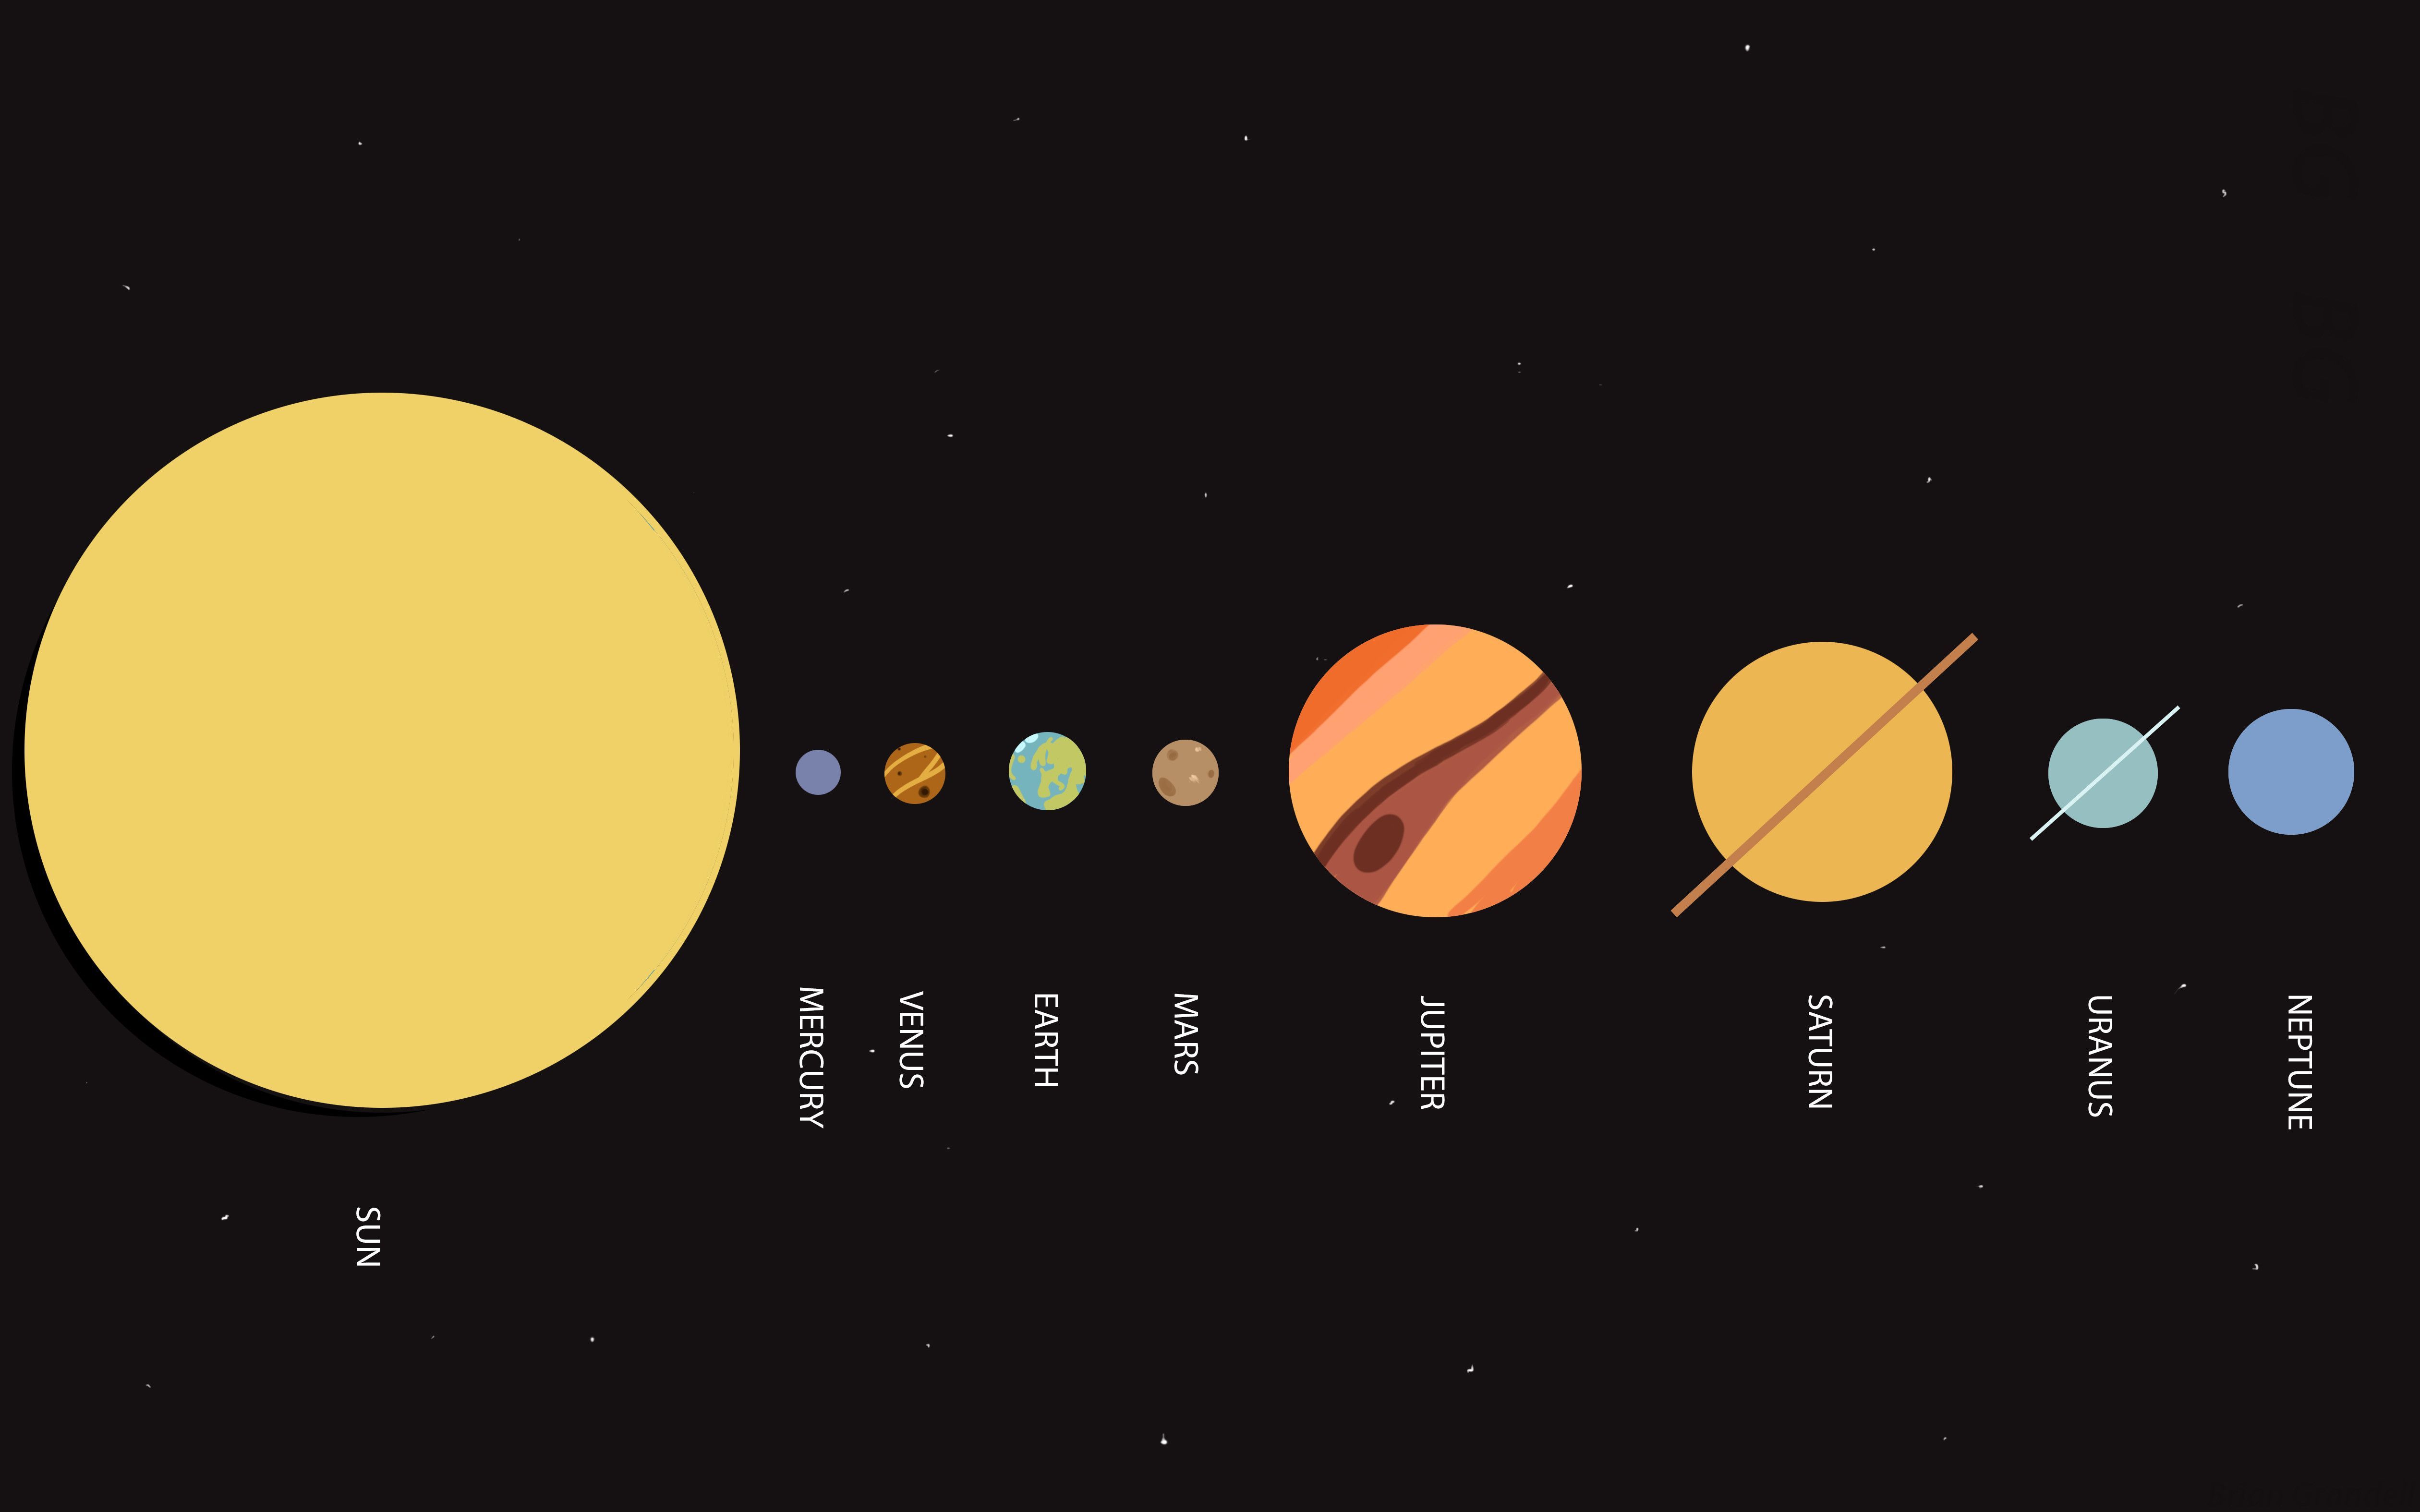 Tried my hand at making a minimalist style solar system wallpaper